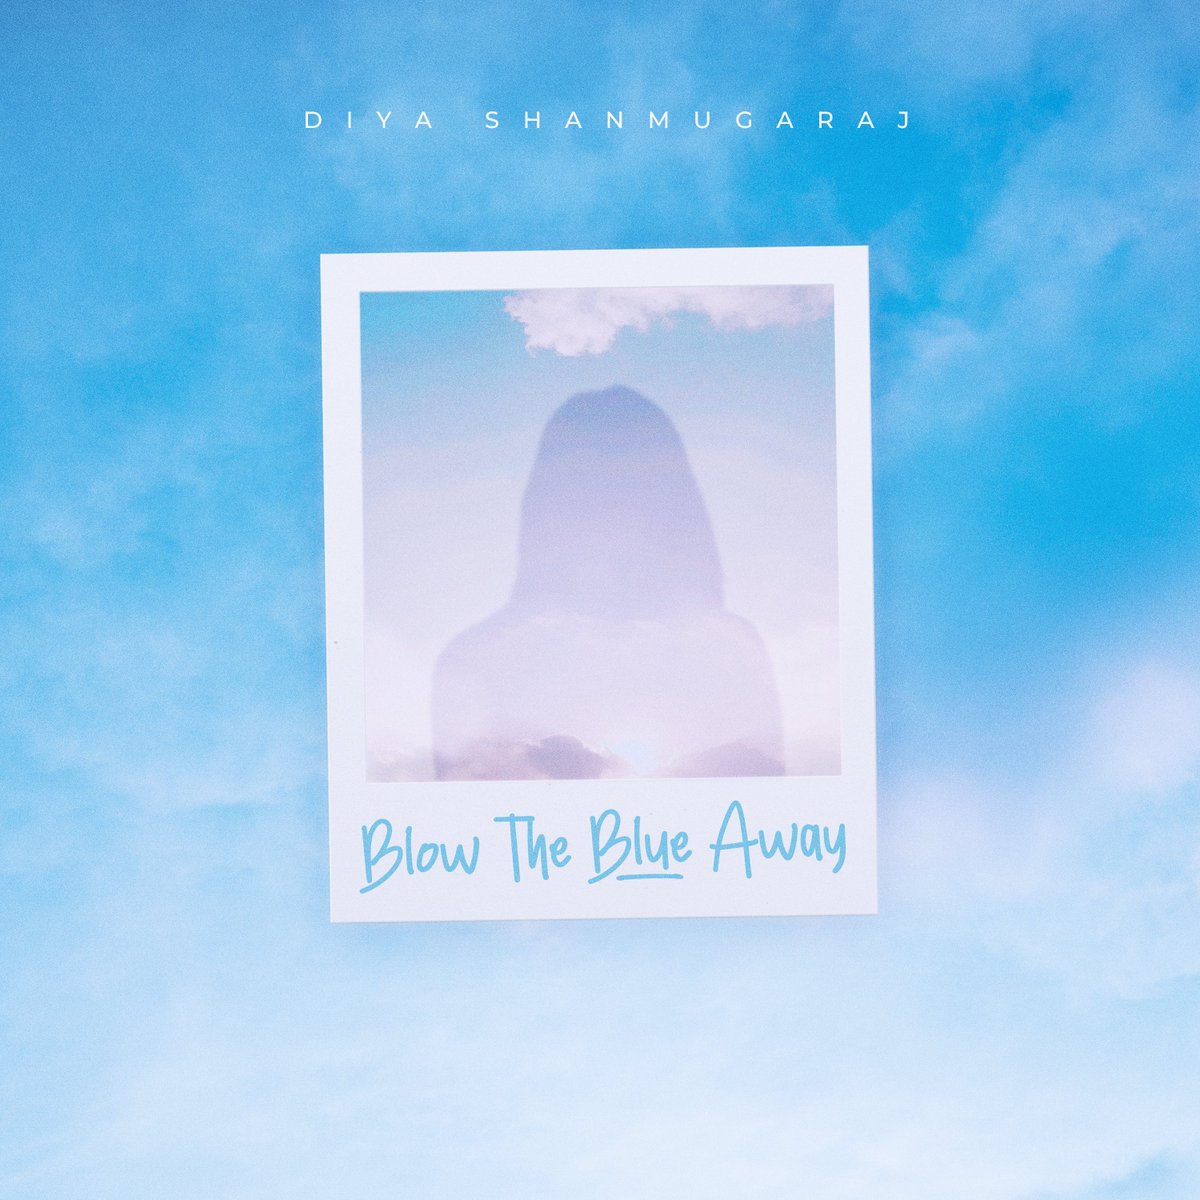 Following the hugely successful MCS Parents’ Association Charity Auction last summer, @DiyaShanmugaraj (sister of J3 pupil Atharv) has recorded a track in collaboration with acclaimed songwriter and record producer @jimmynapes🎶 ‘Blow the Blue Away’ will be released on Friday